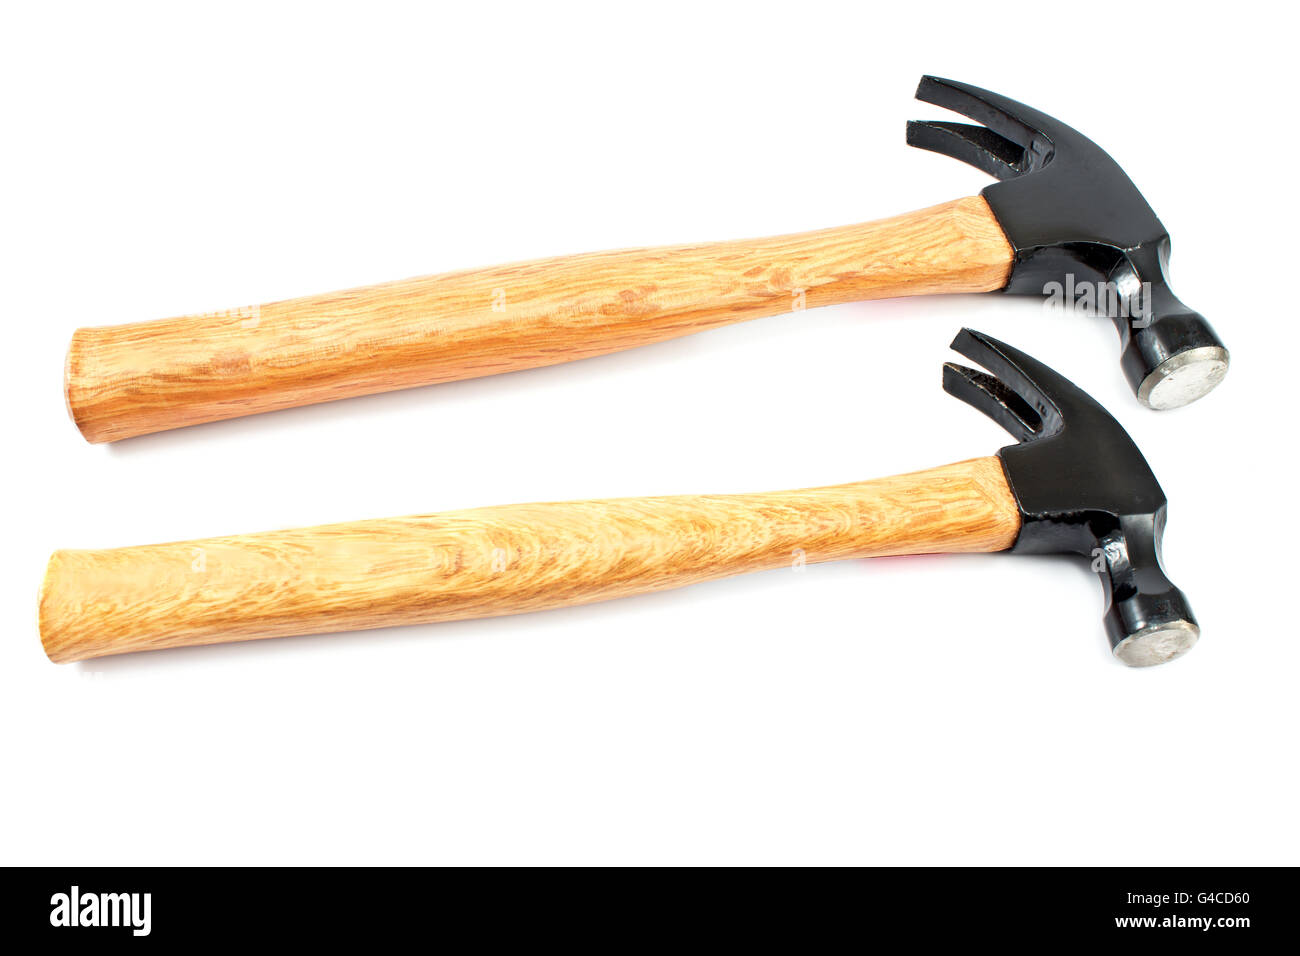 Two Hammers Closeup Isolated Stock Photo Alamy